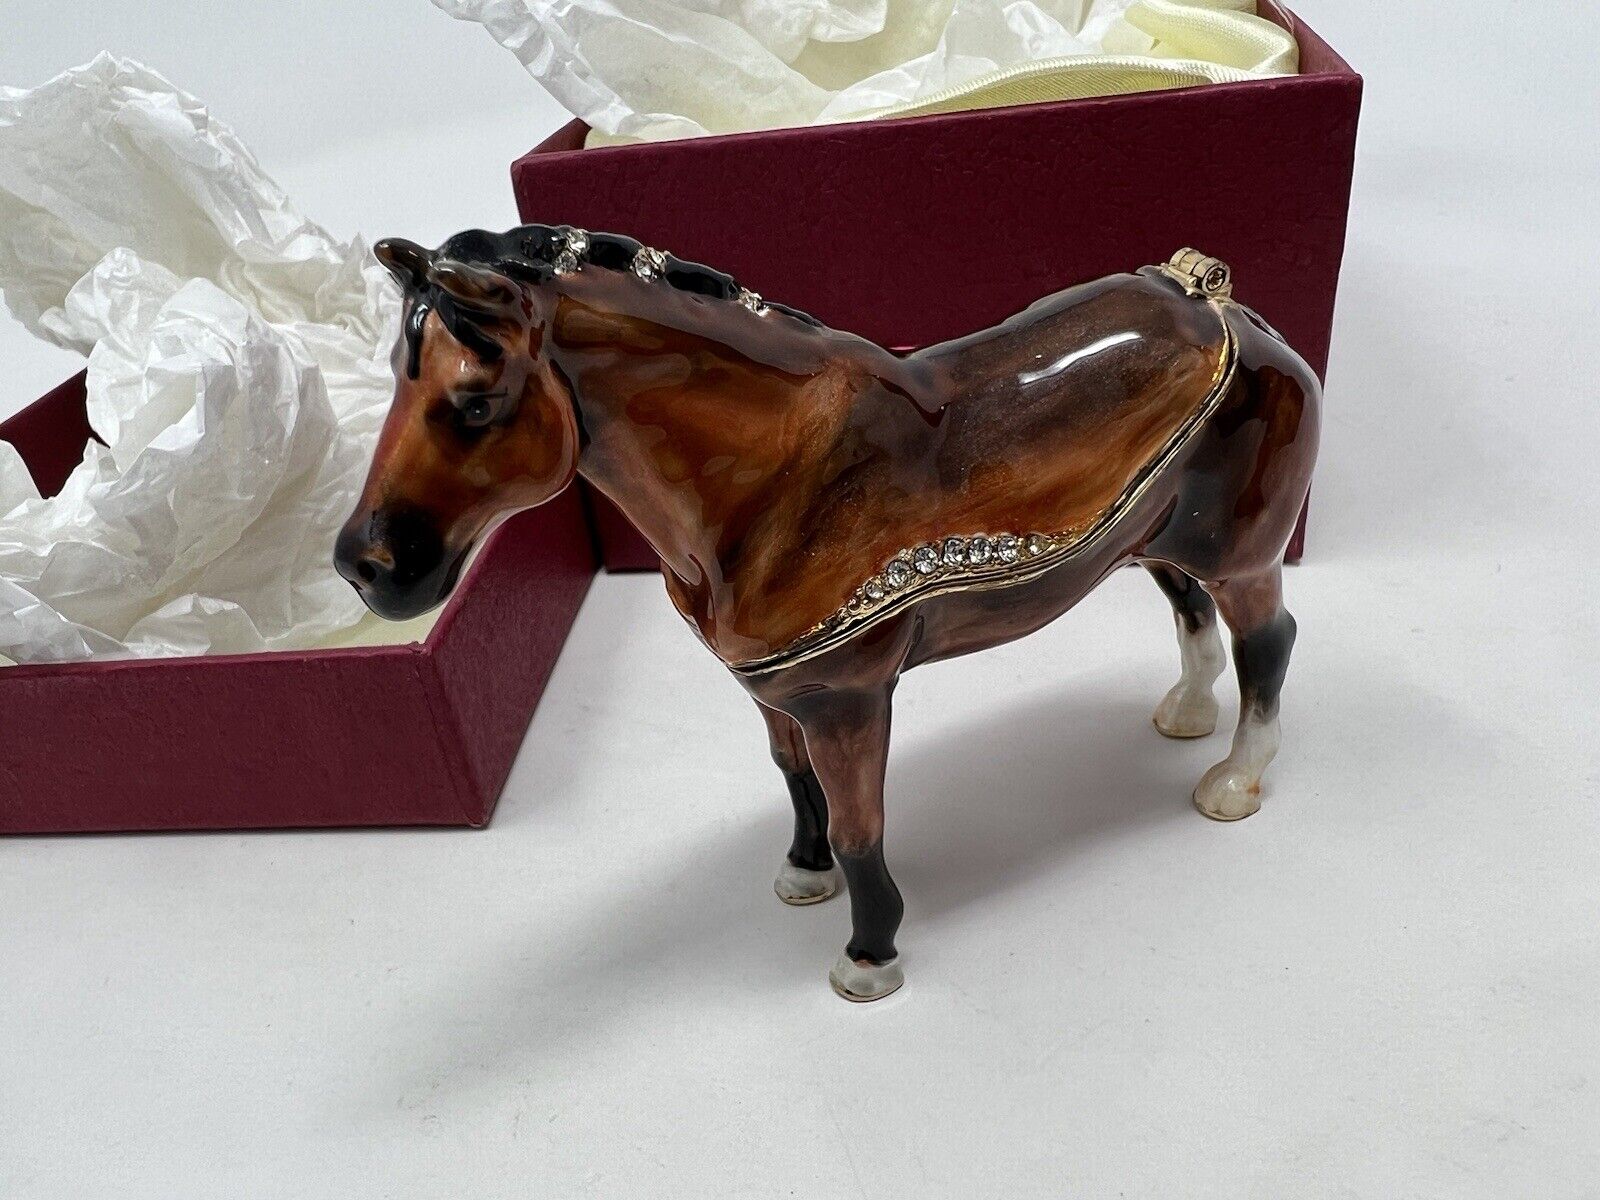 NOBILITY BEJEWELED BOX  HORSE 3426 BRAND NEW IN BOX